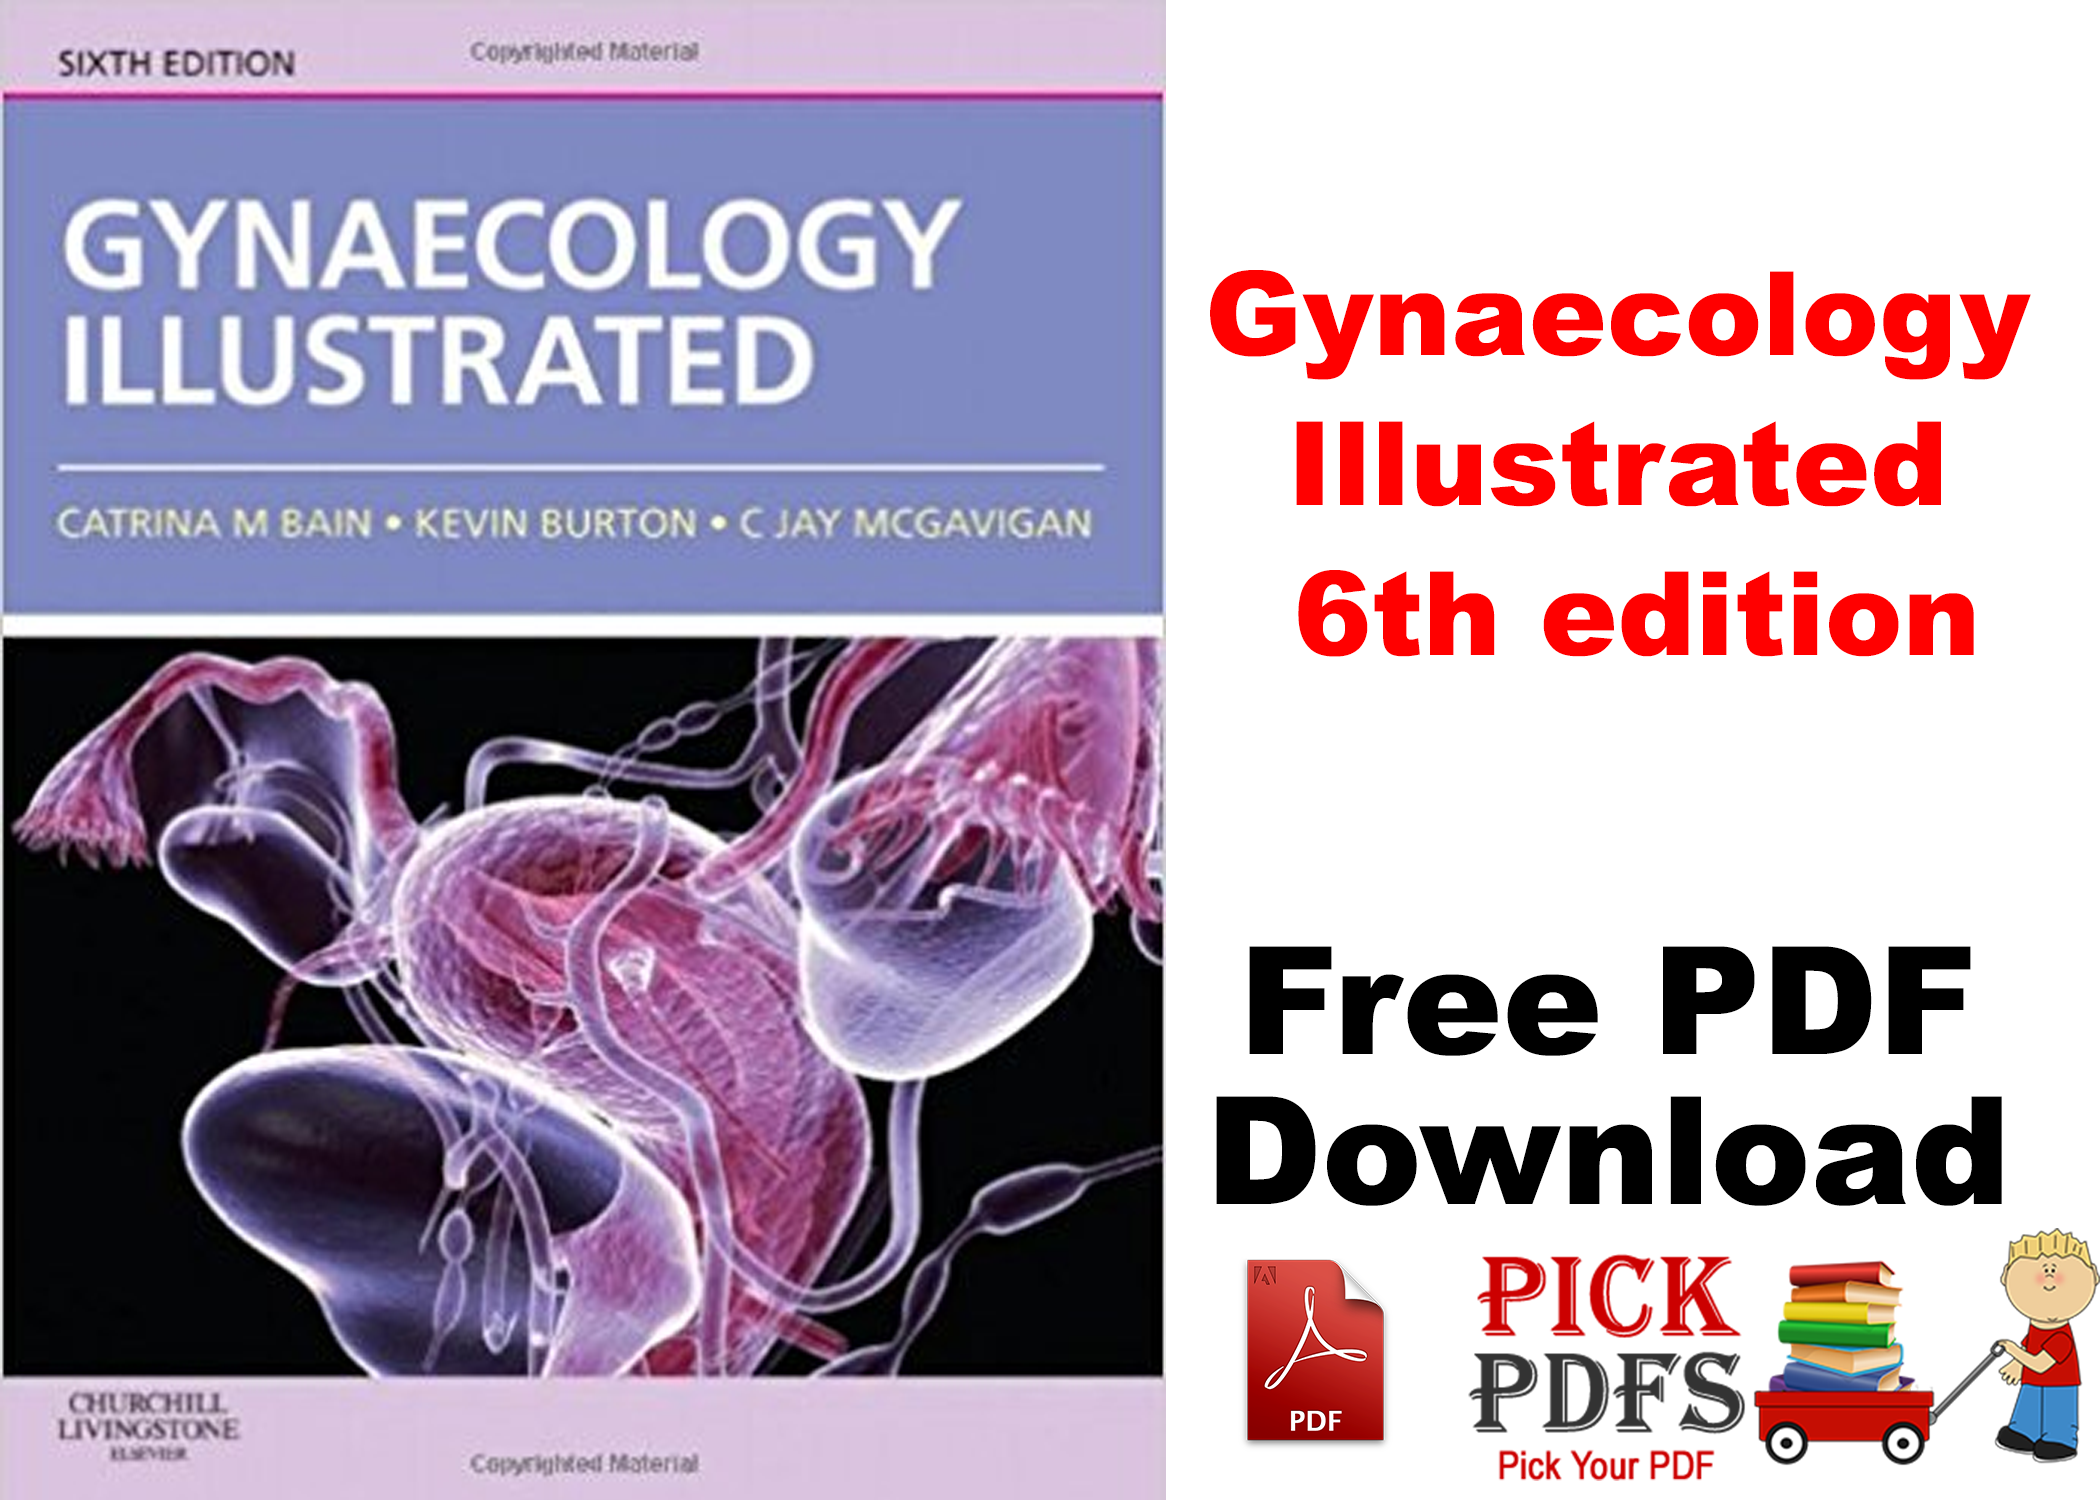 https://pickpdfs.com/gynaecology-illustrated-6th-edition-free-book-download-pdf/